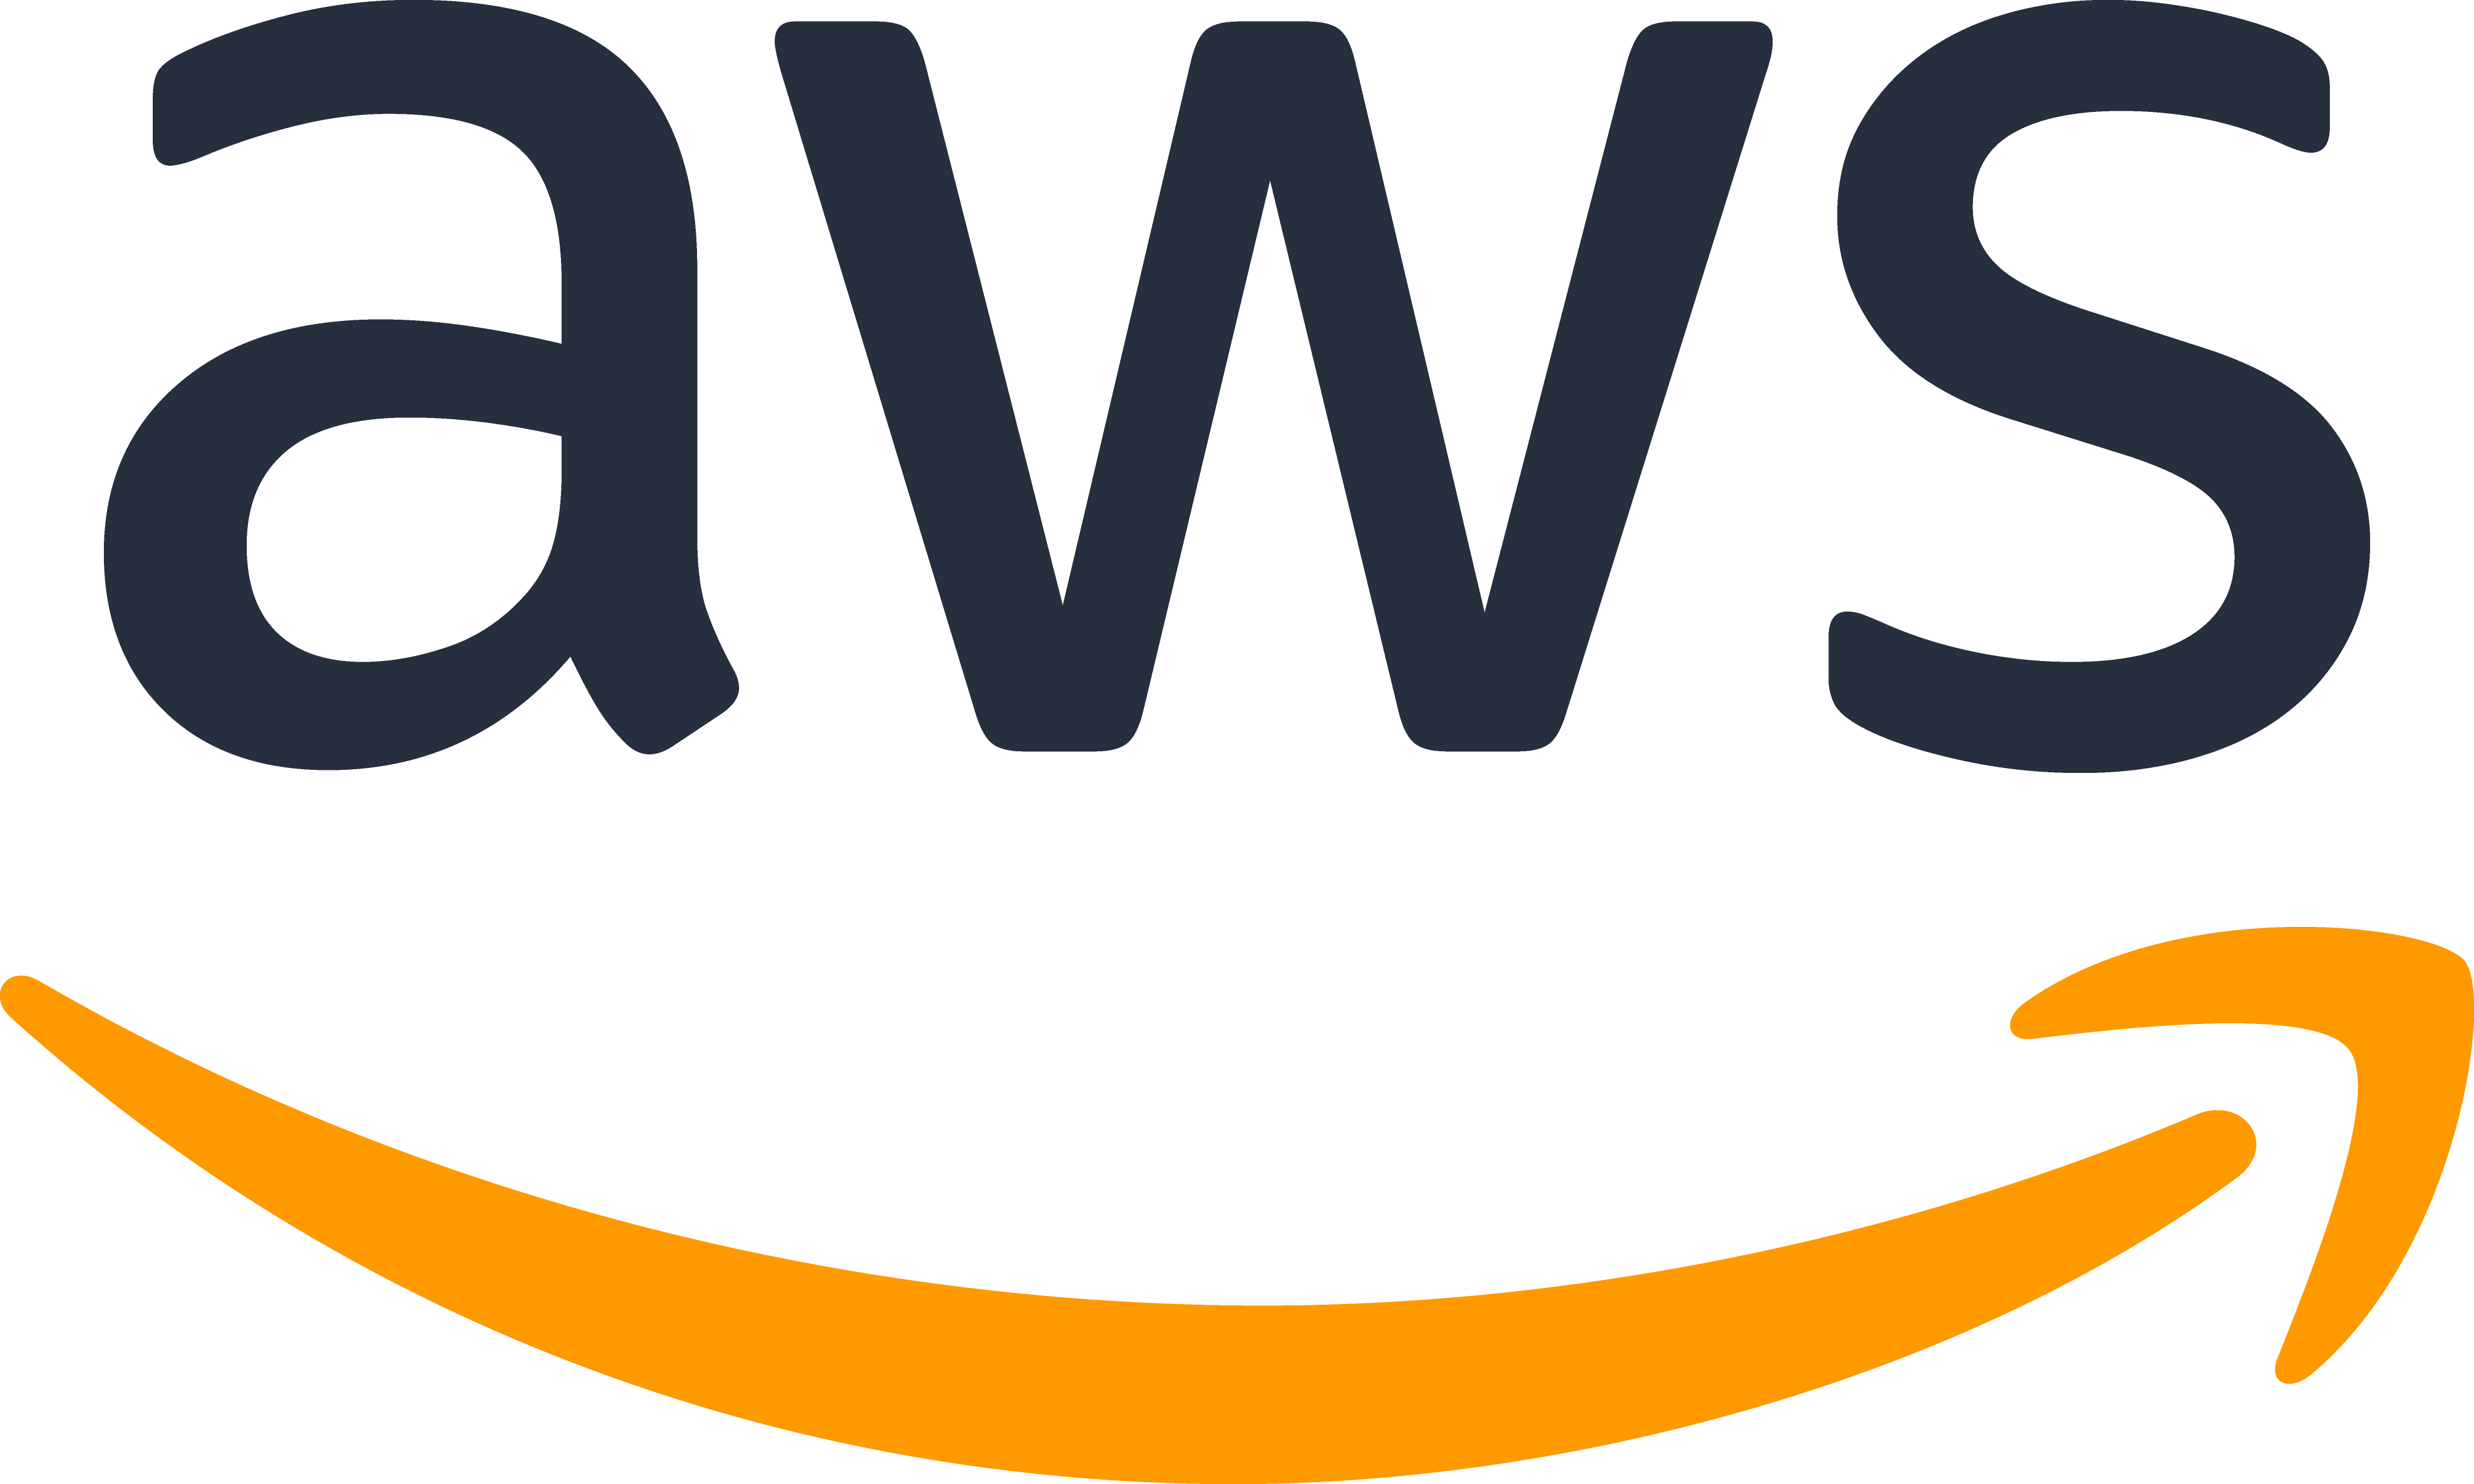 Amazon Web Services To Invest $5B For Digital Infrastructure In Thailand